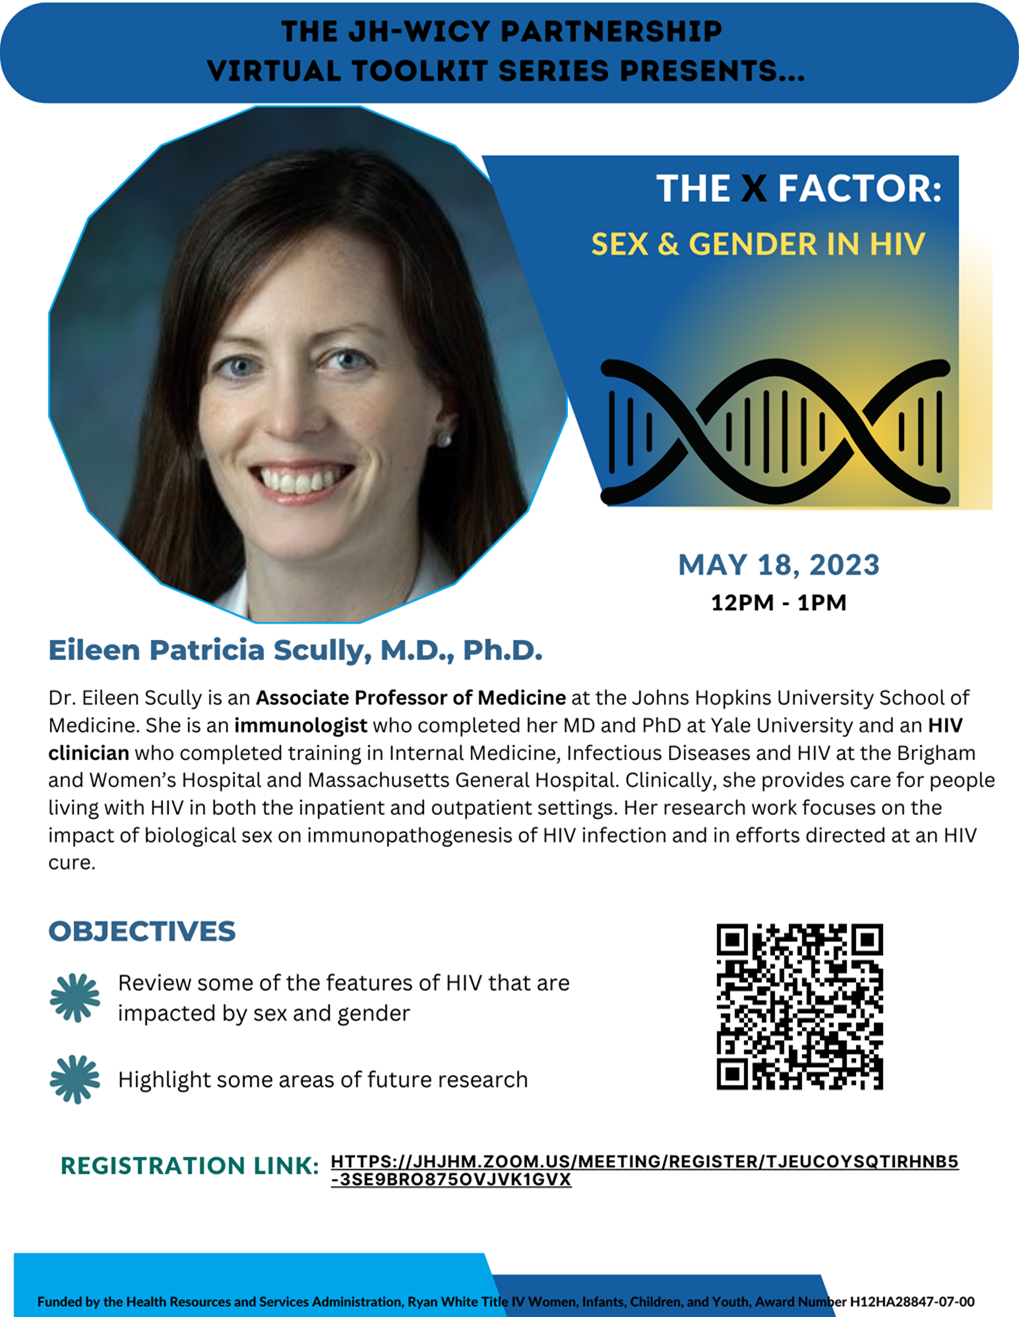 Flyer containing event information and headshot of Eileen Patricia Scully, MD, PhD.